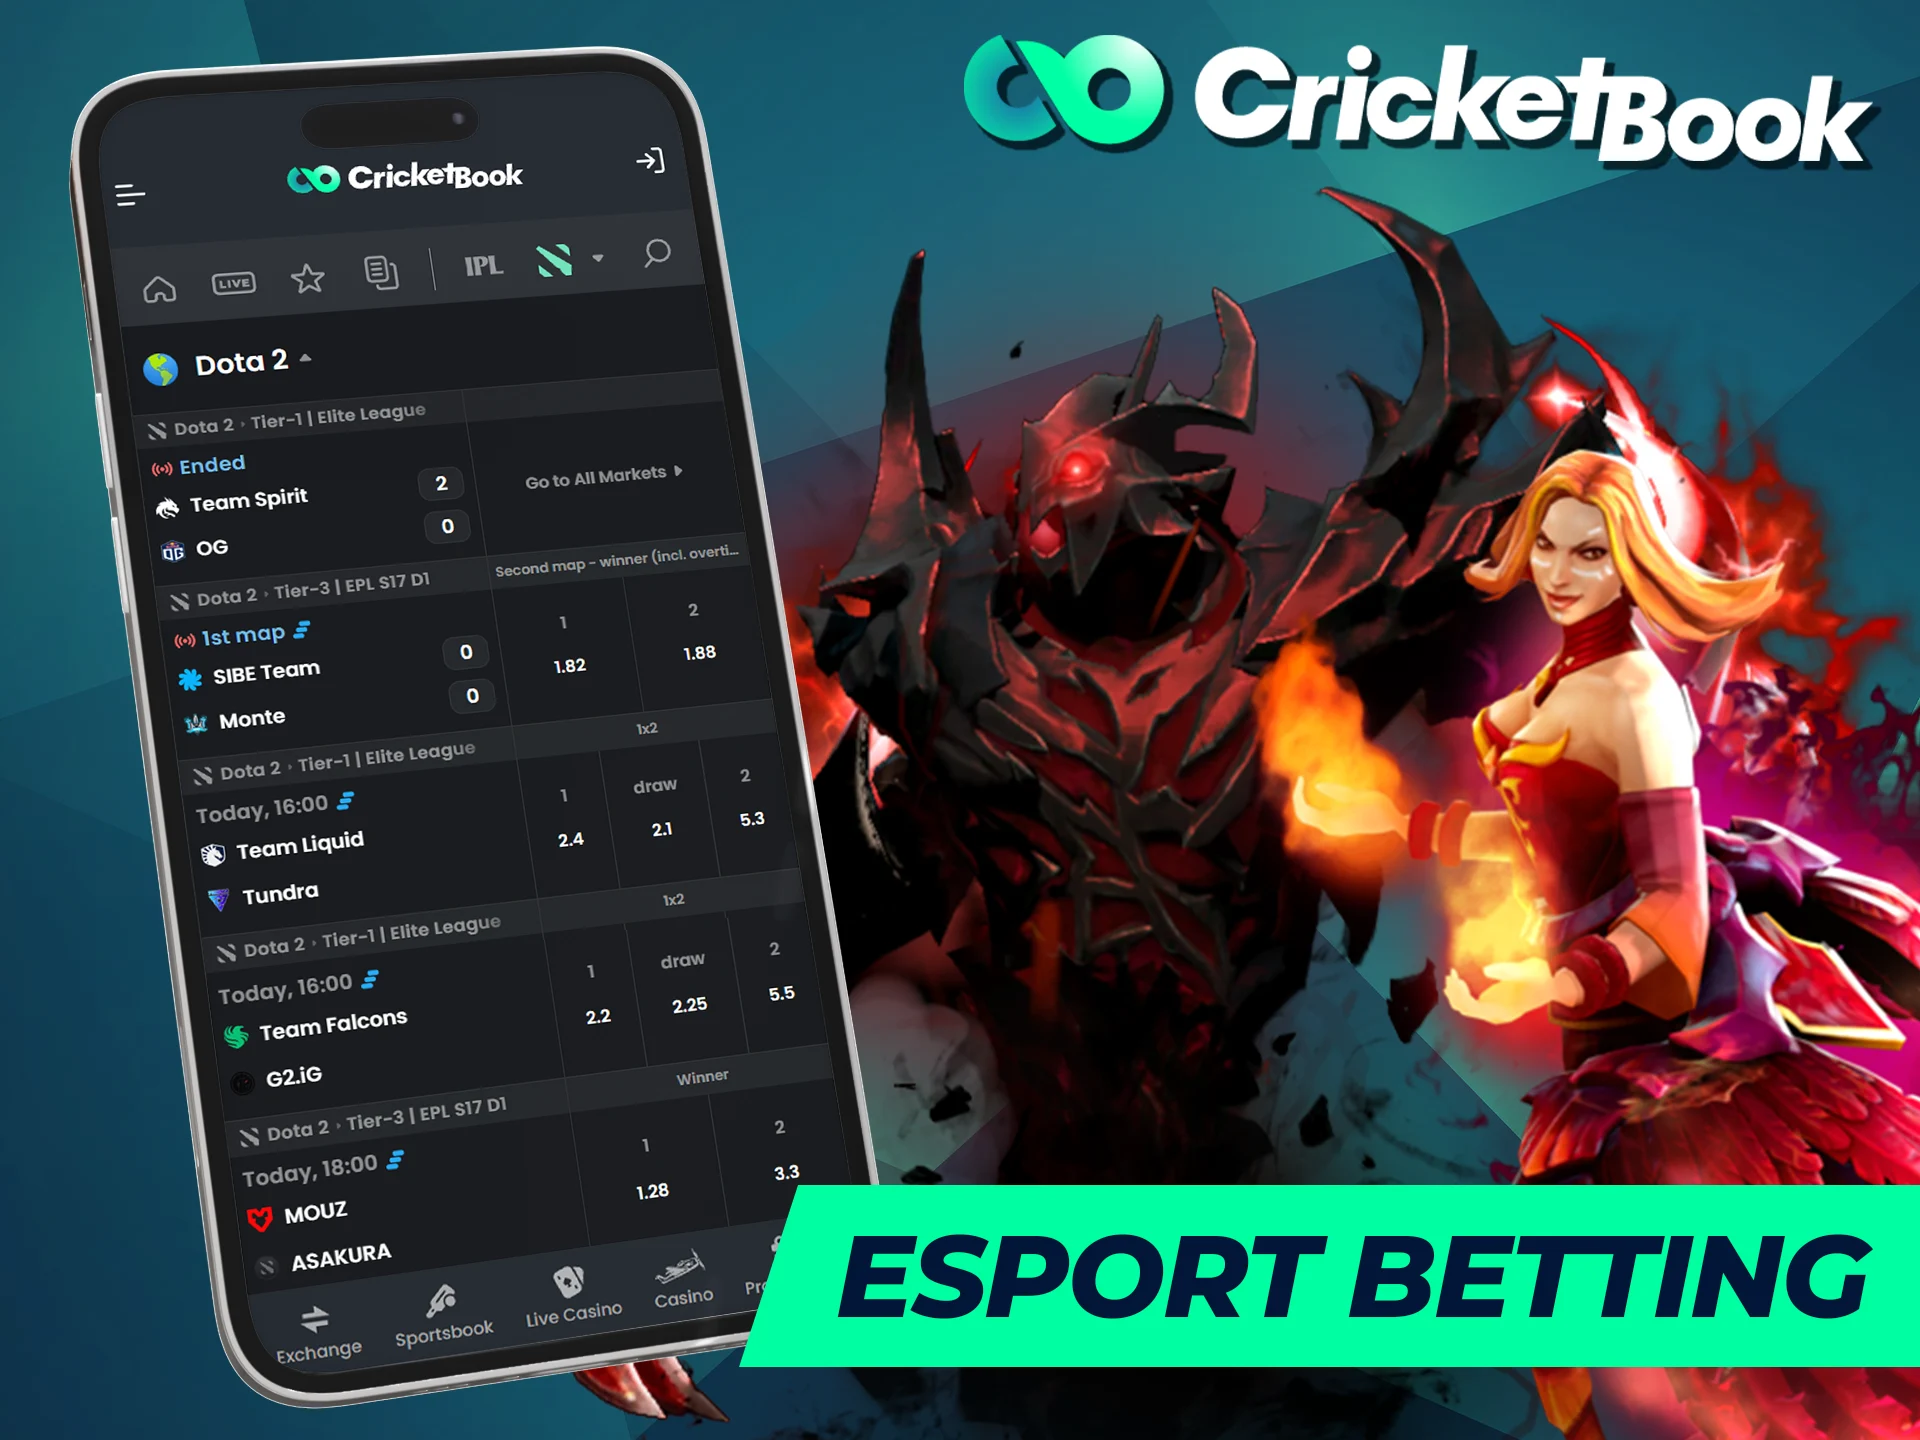 The CricketBook app has plenty of games to choose from for ESport betting.